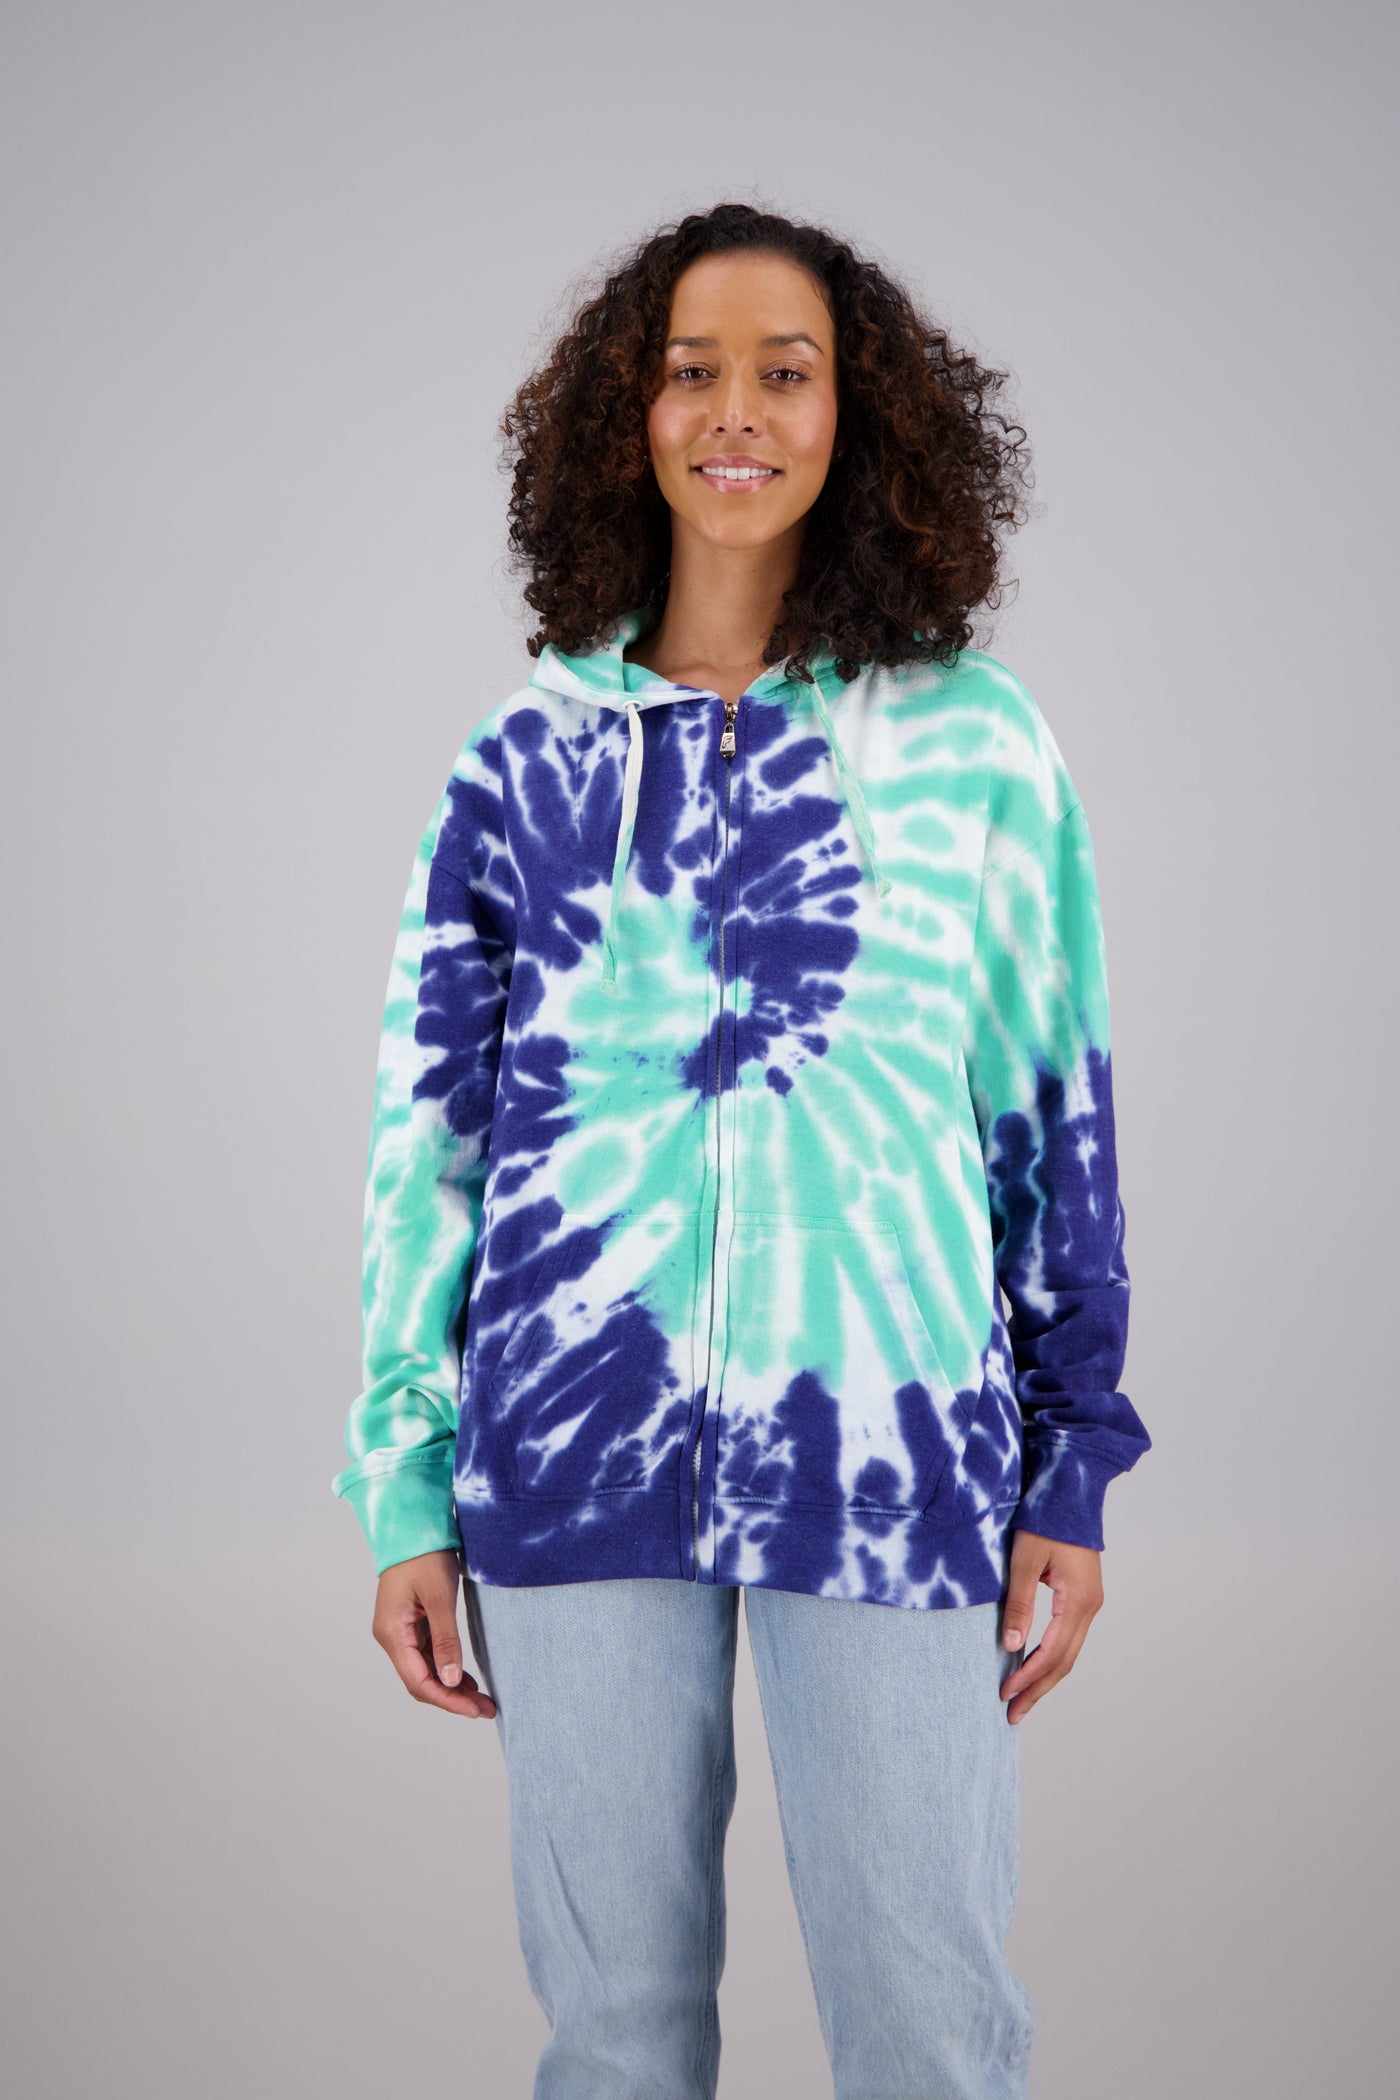 Adult's Tie-Dye Zip-Up Hoodie (2-XL) Cotton/Polyester Blend 9659